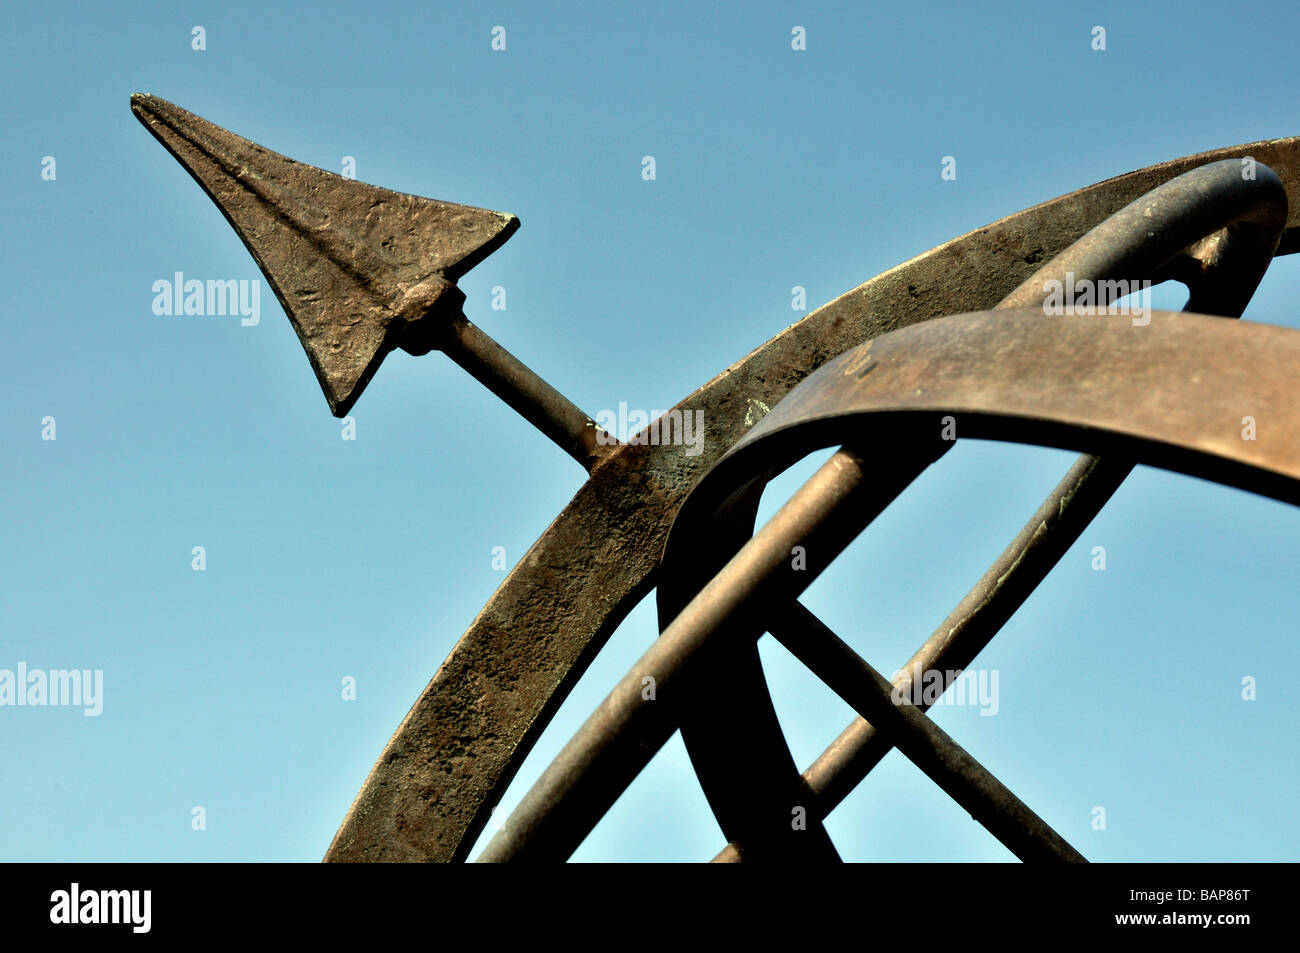 Armillary sphere or compass. Stock Photo